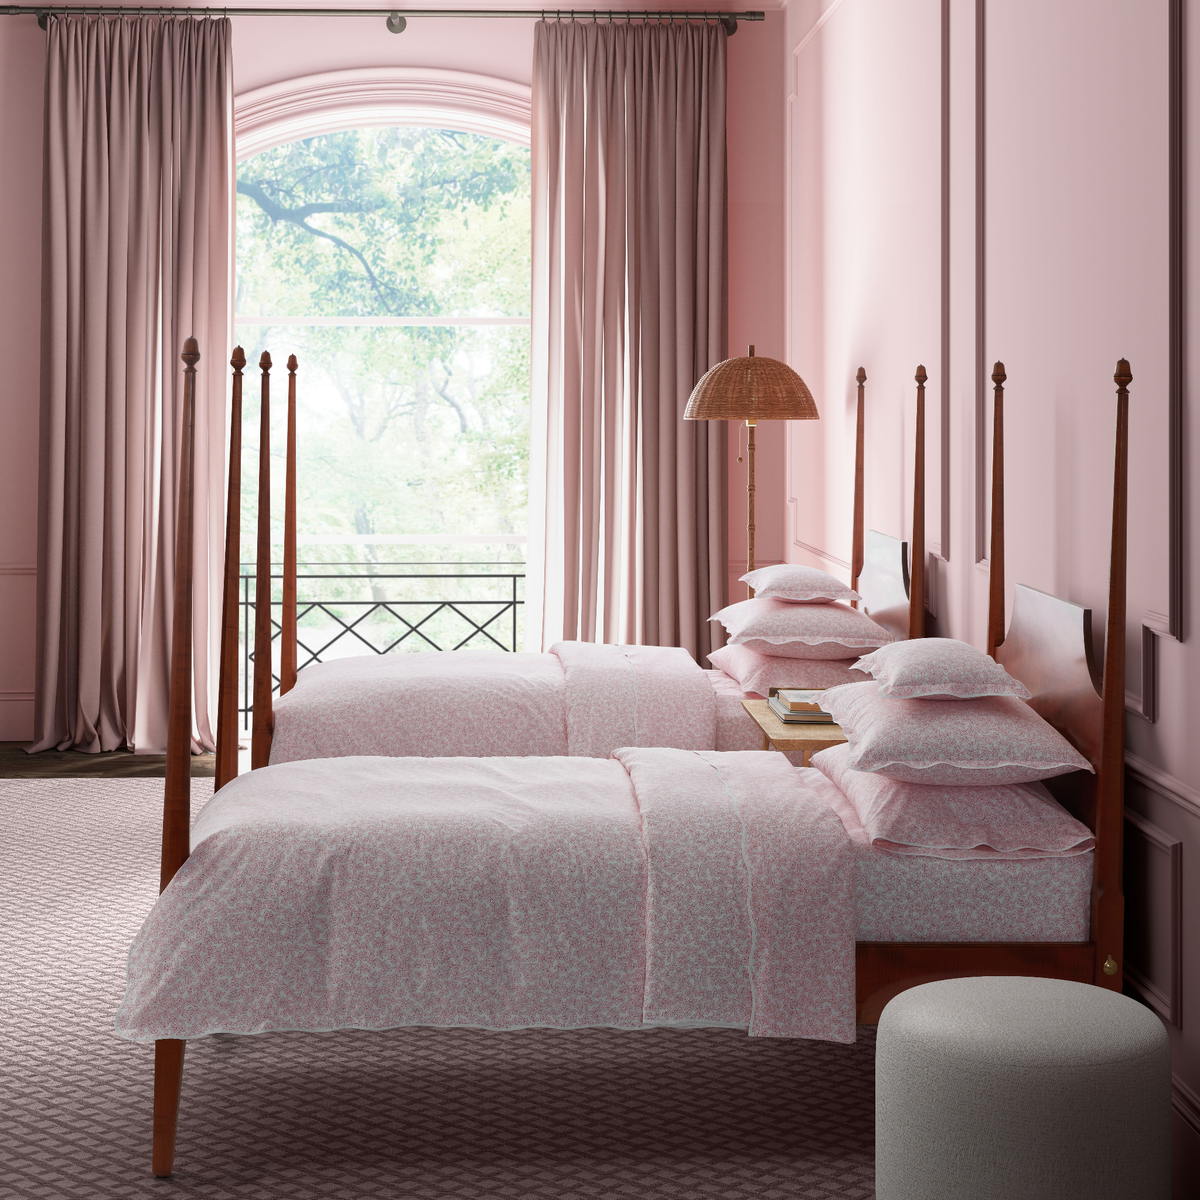 Two Single Beds Dressed in Matouk Margot Bedding in Blush Color in a Pink Room